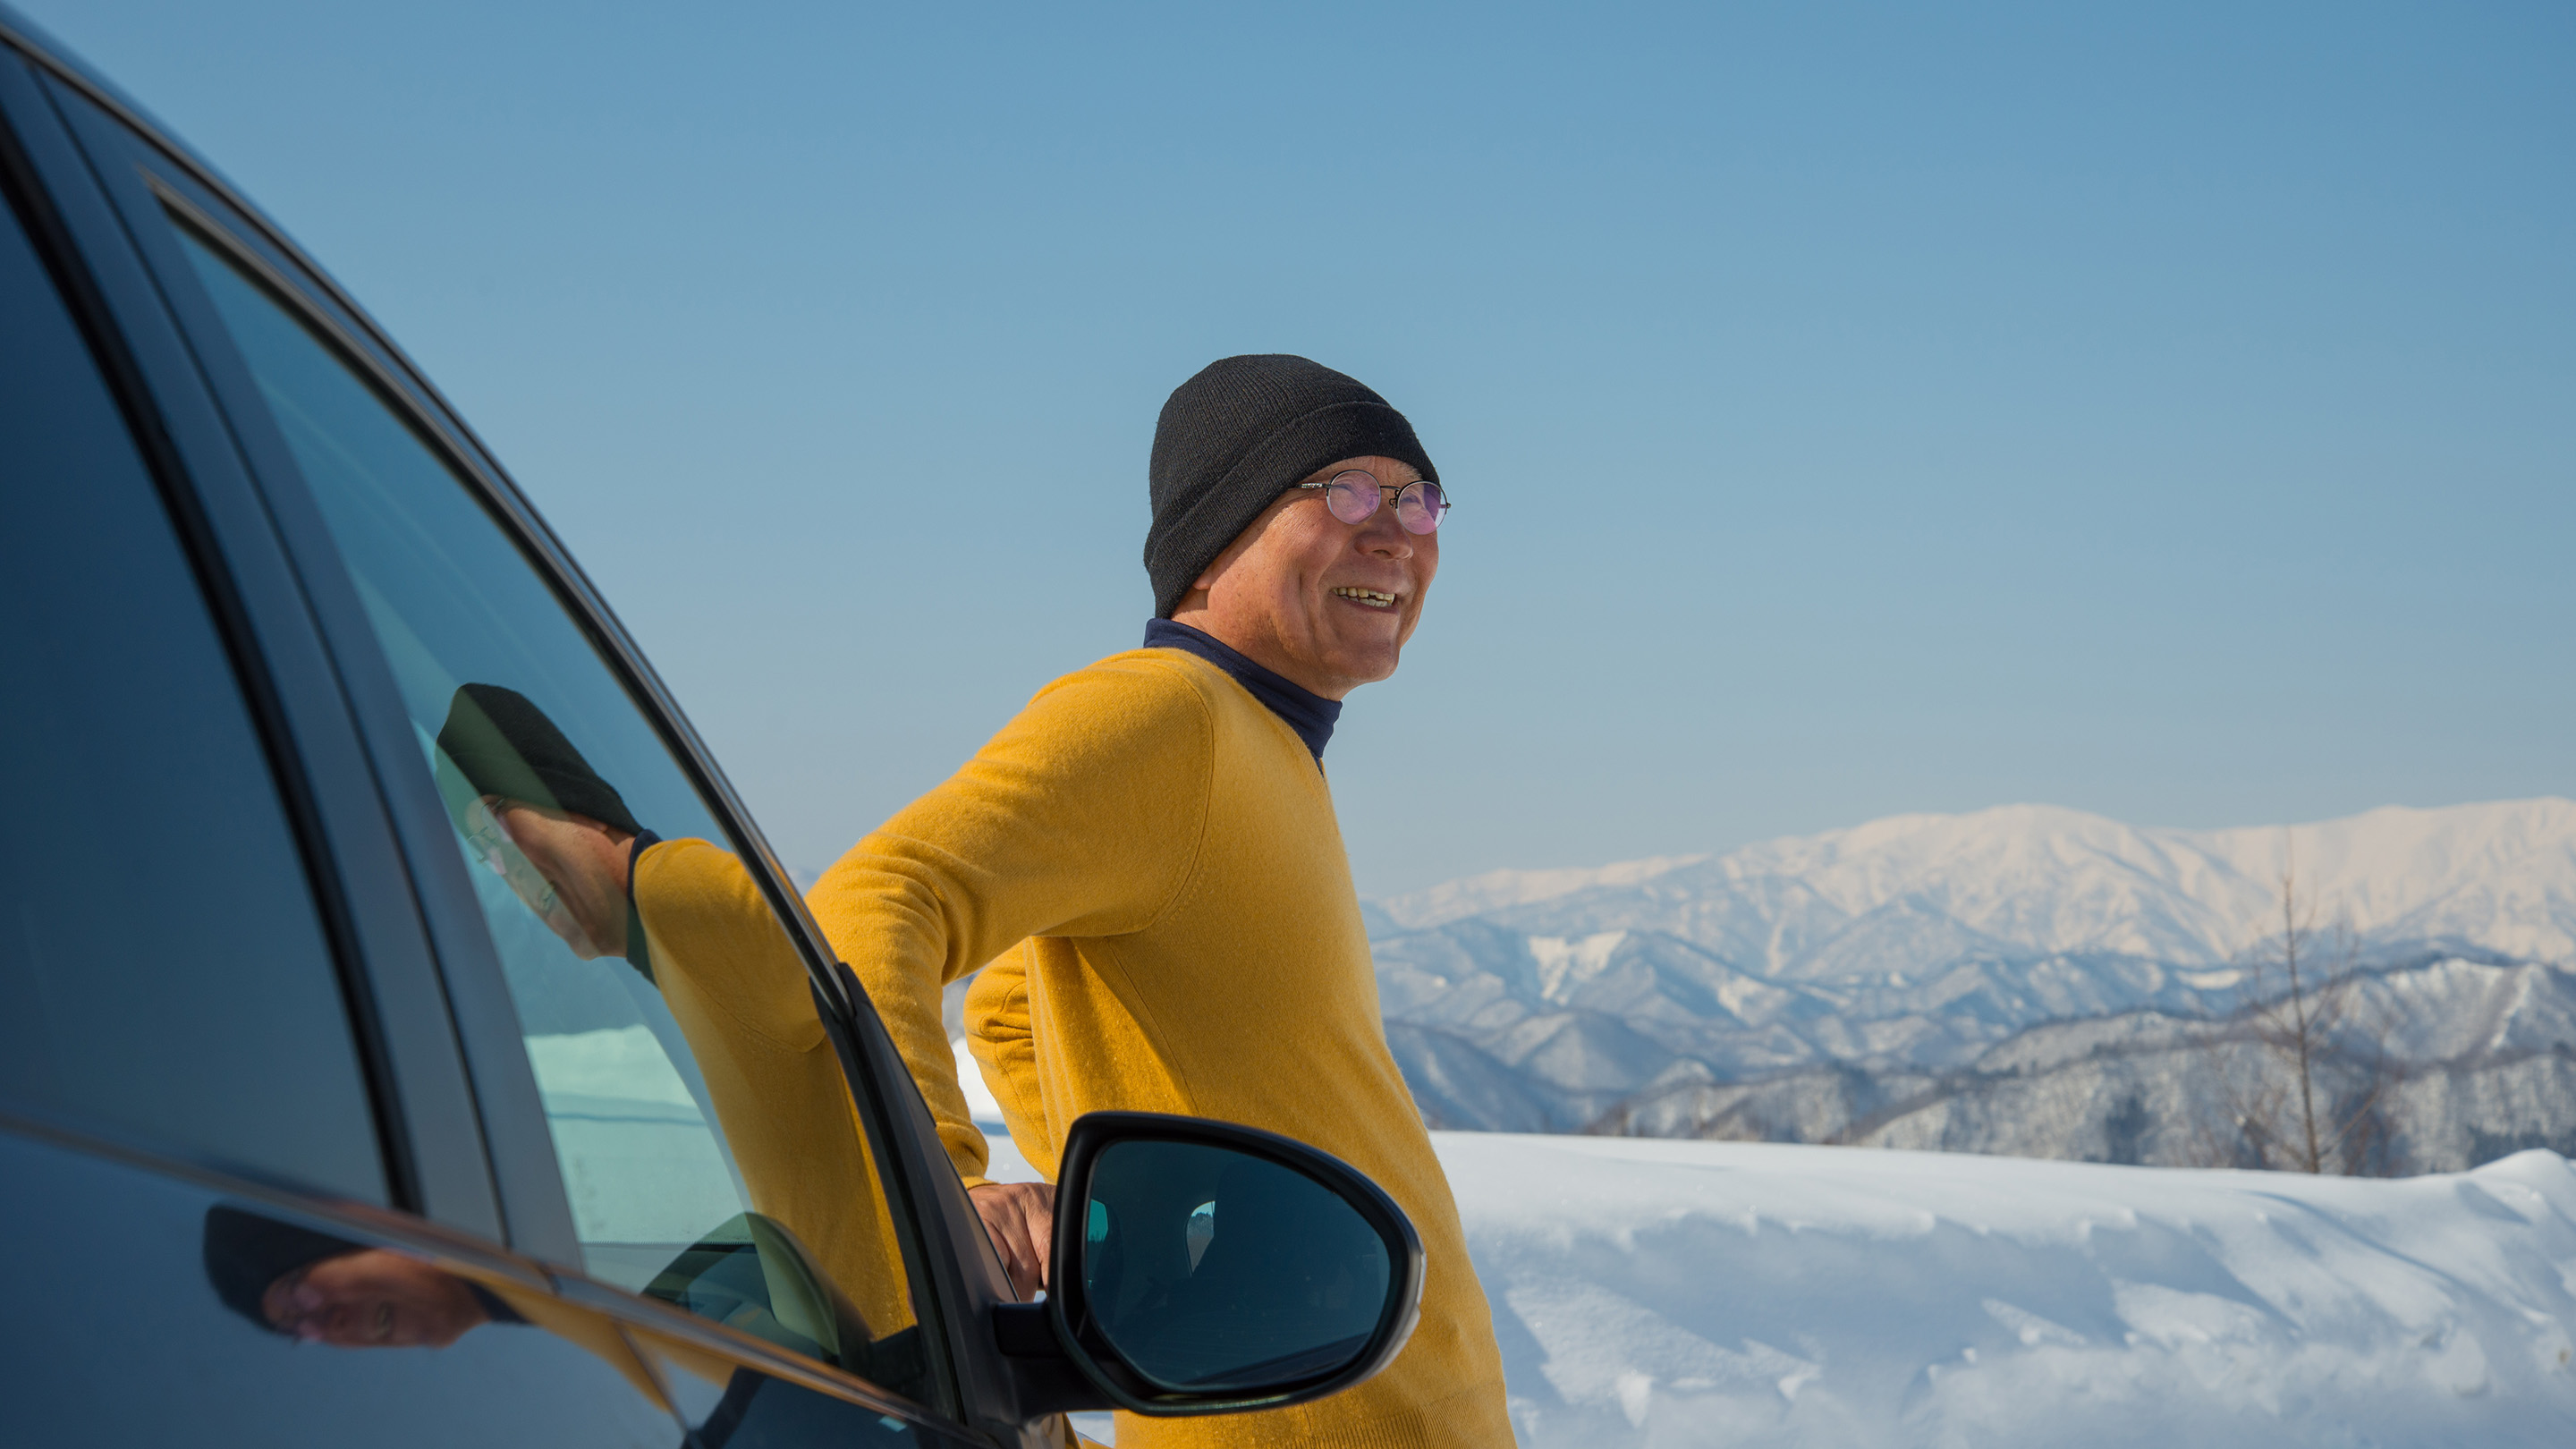 Man standing next to his car, surrounded by snowy mountains.